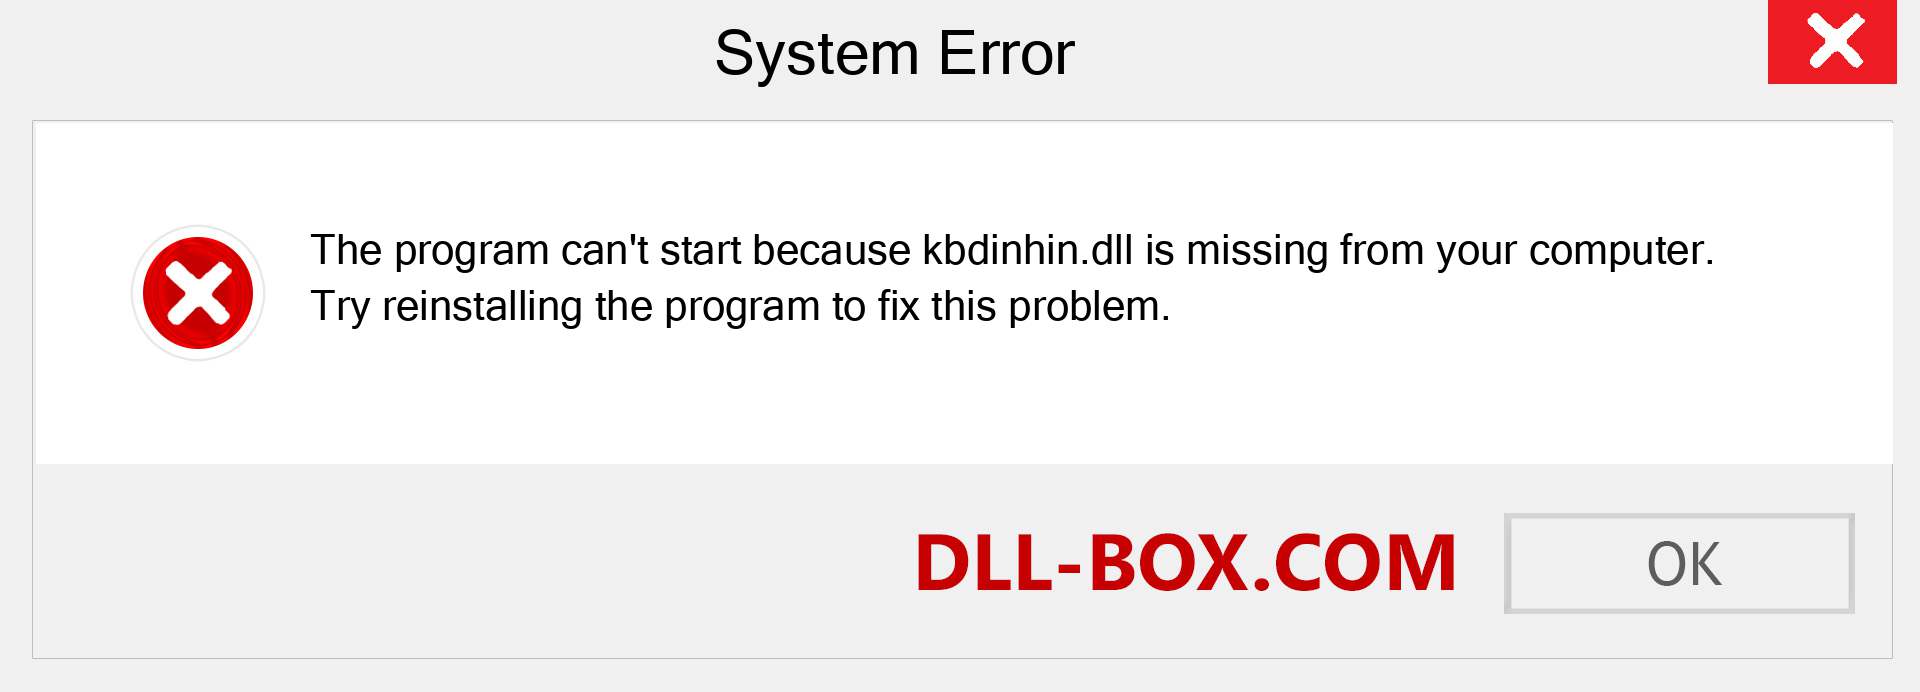  kbdinhin.dll file is missing?. Download for Windows 7, 8, 10 - Fix  kbdinhin dll Missing Error on Windows, photos, images